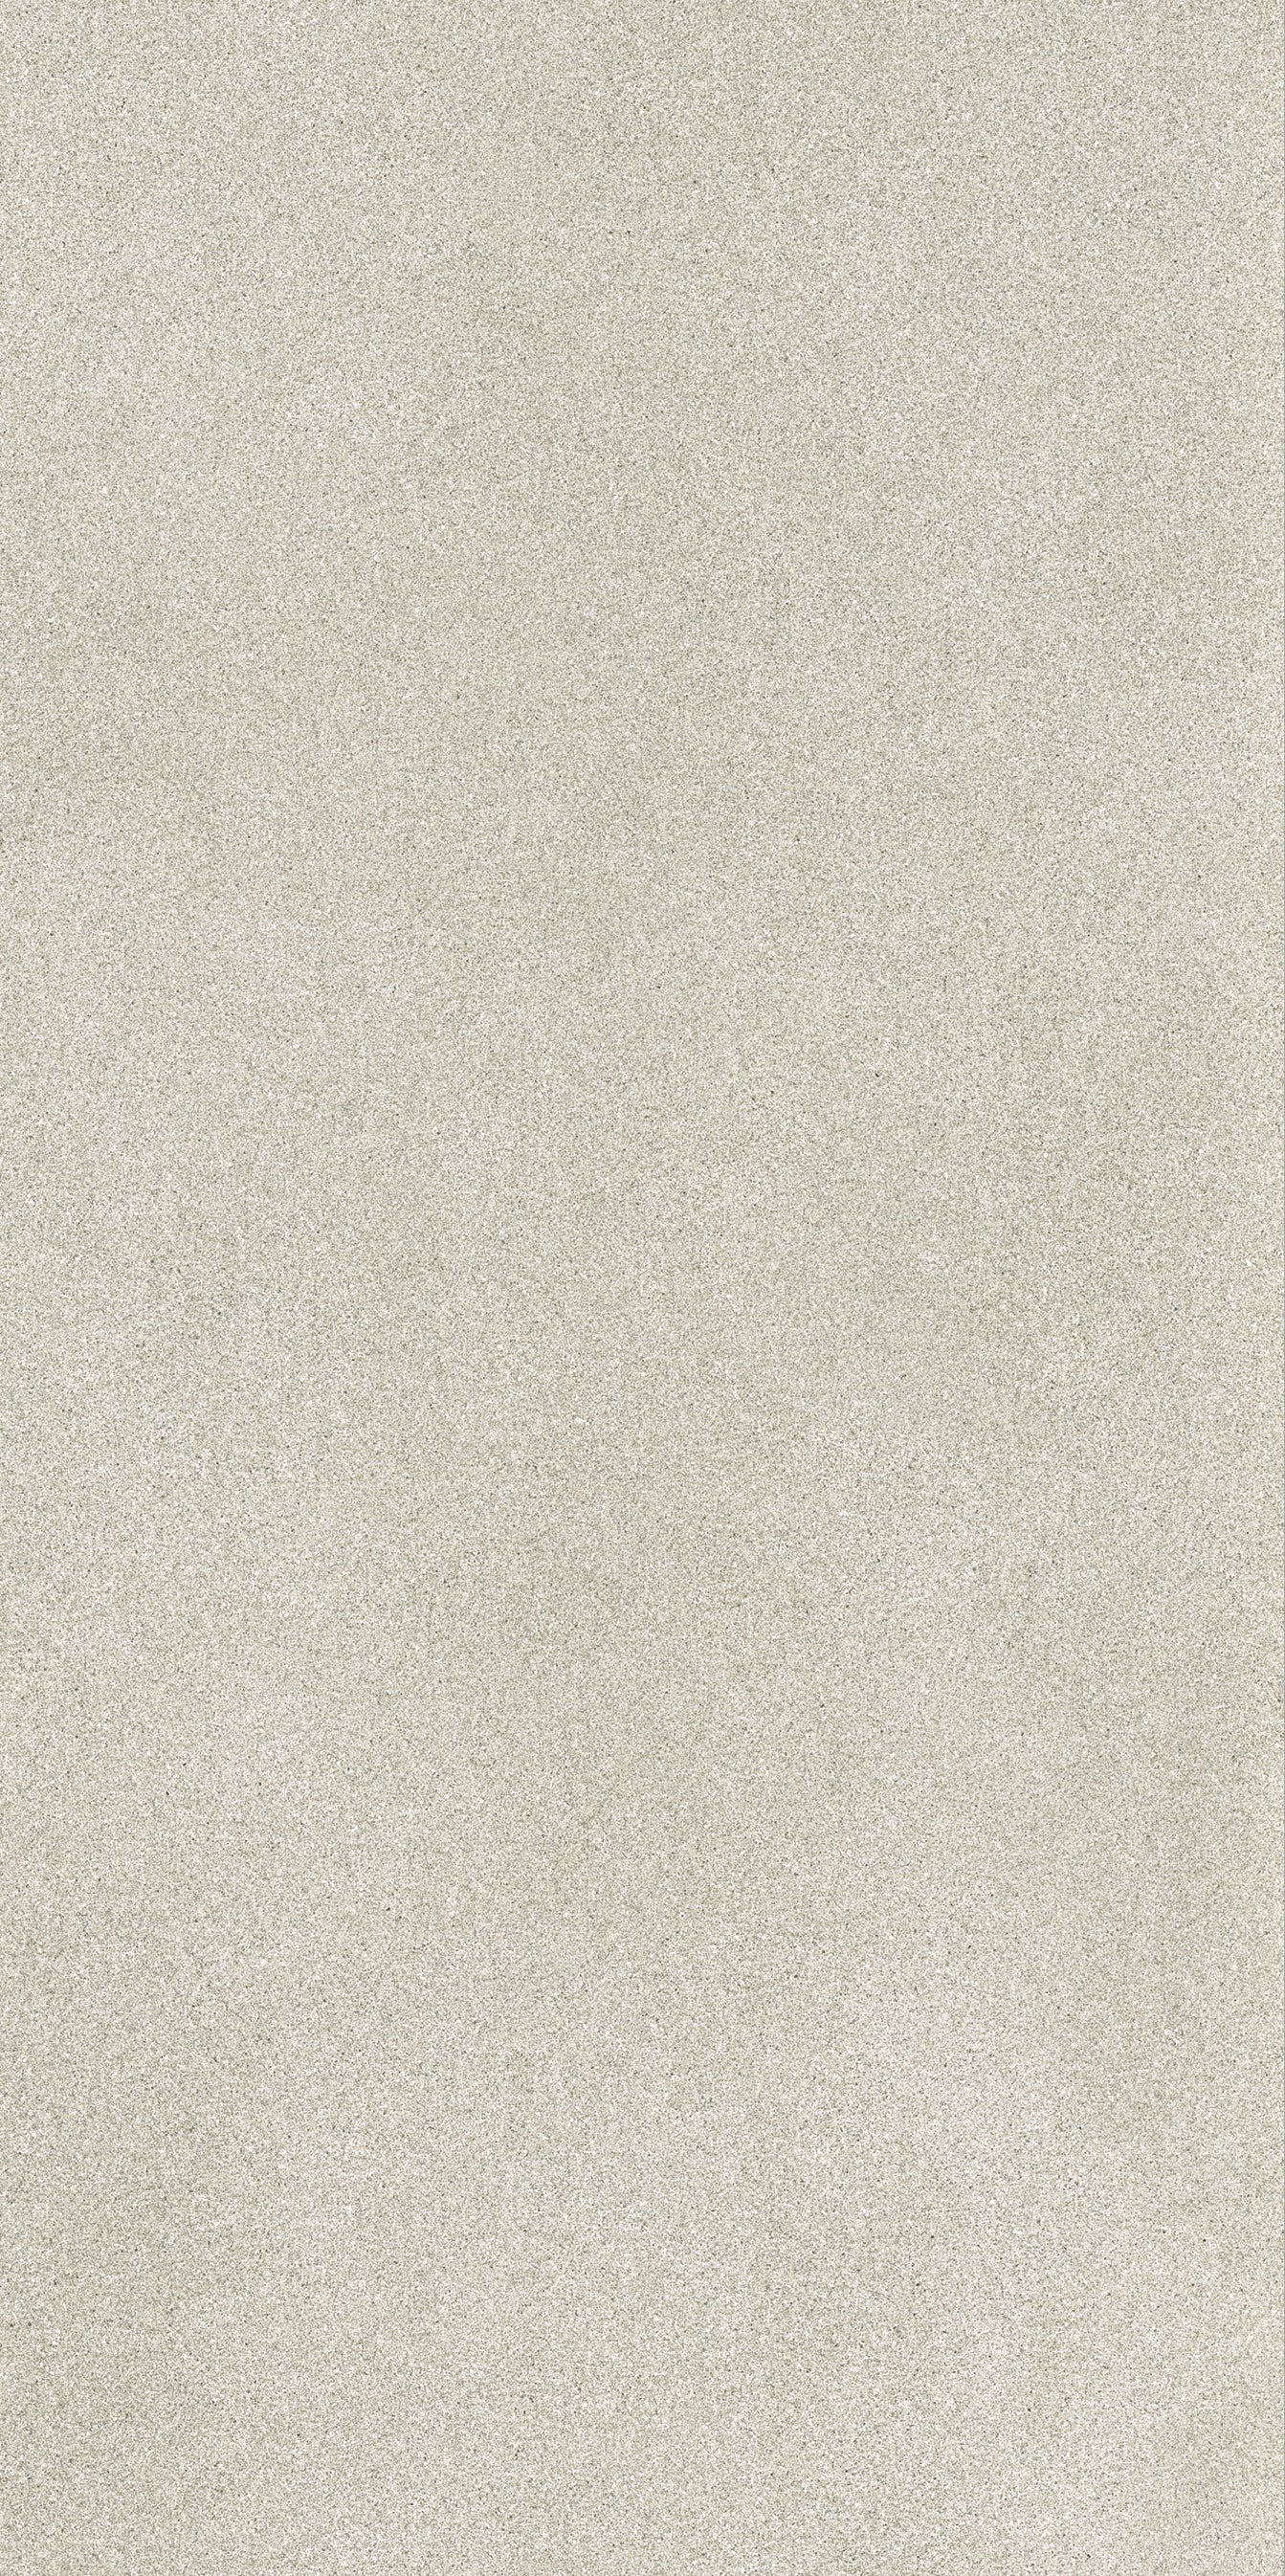 landmark 9mm masterplan precious ivory field tile 12x24x9mm grip rectified porcelain tile distributed by surface group international